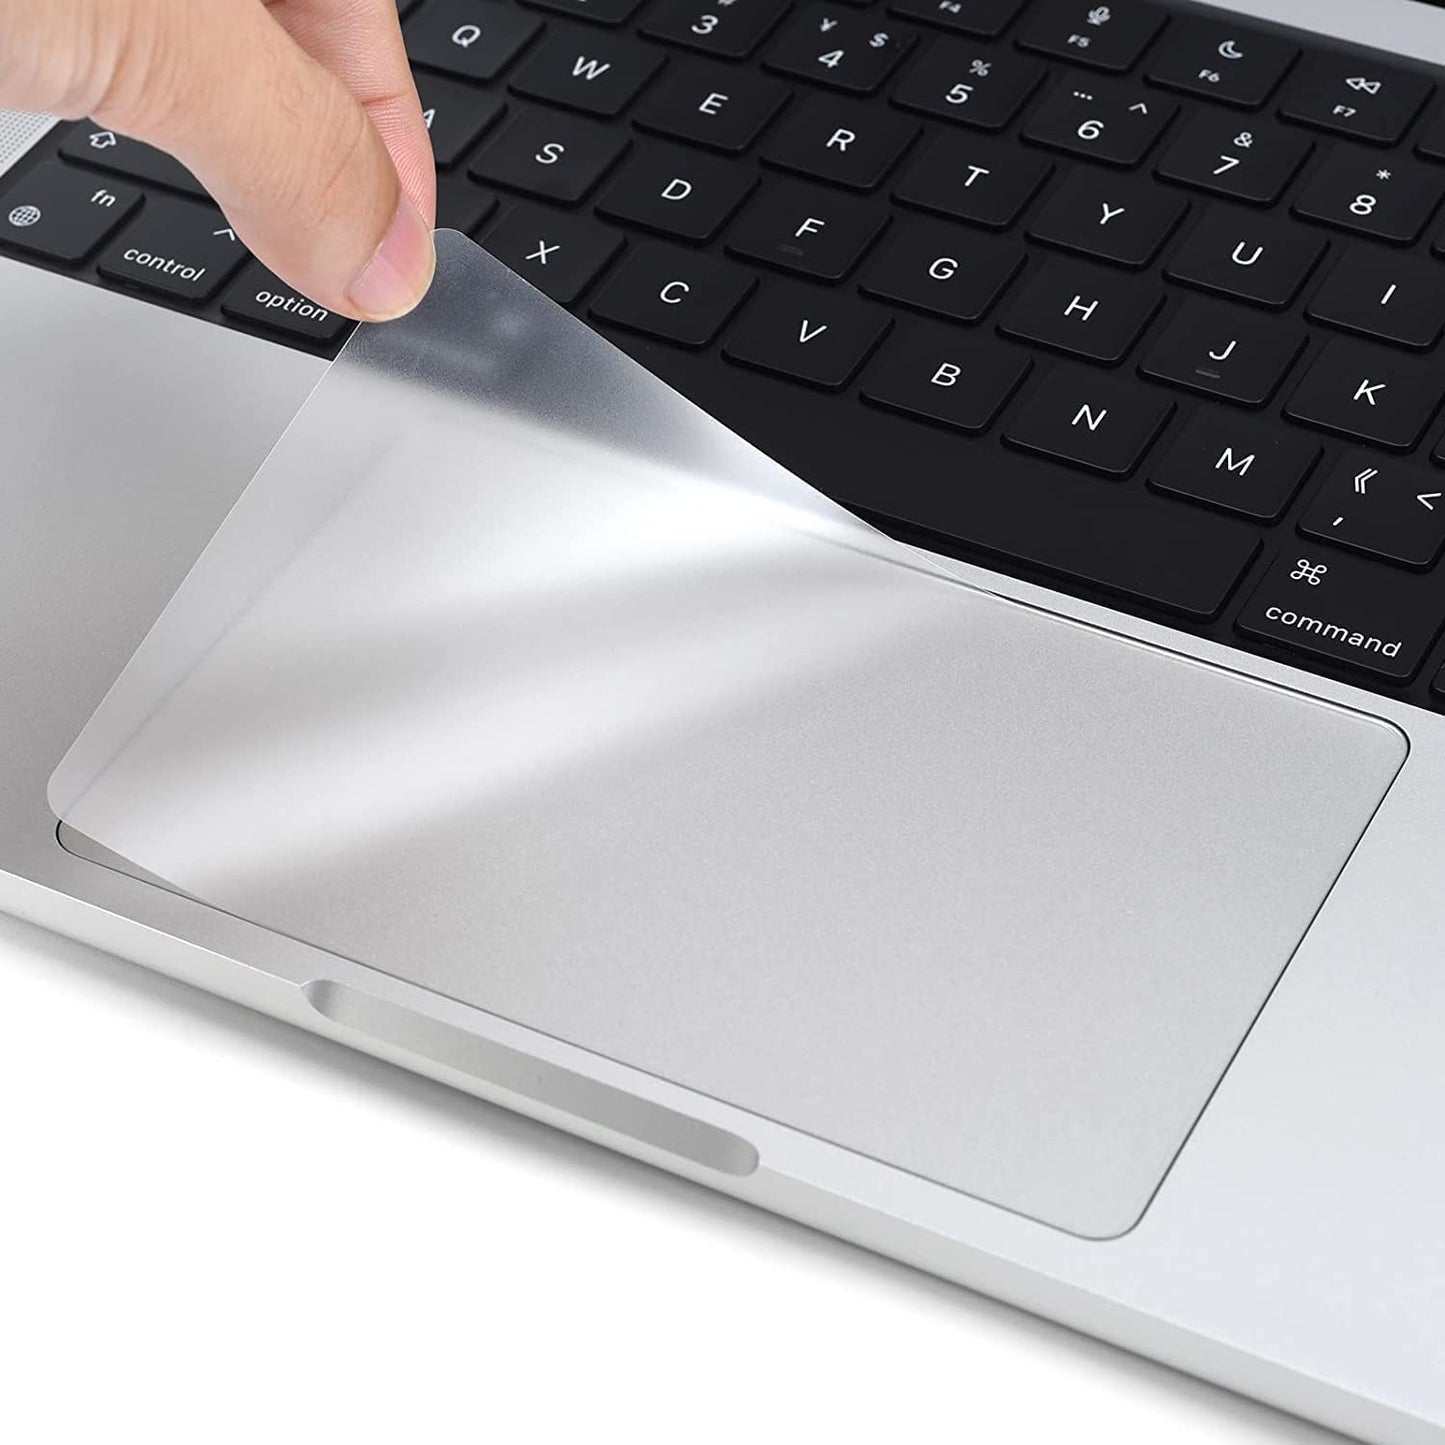 Power Support TrackPad Film for MacBook Pro 15" 2016